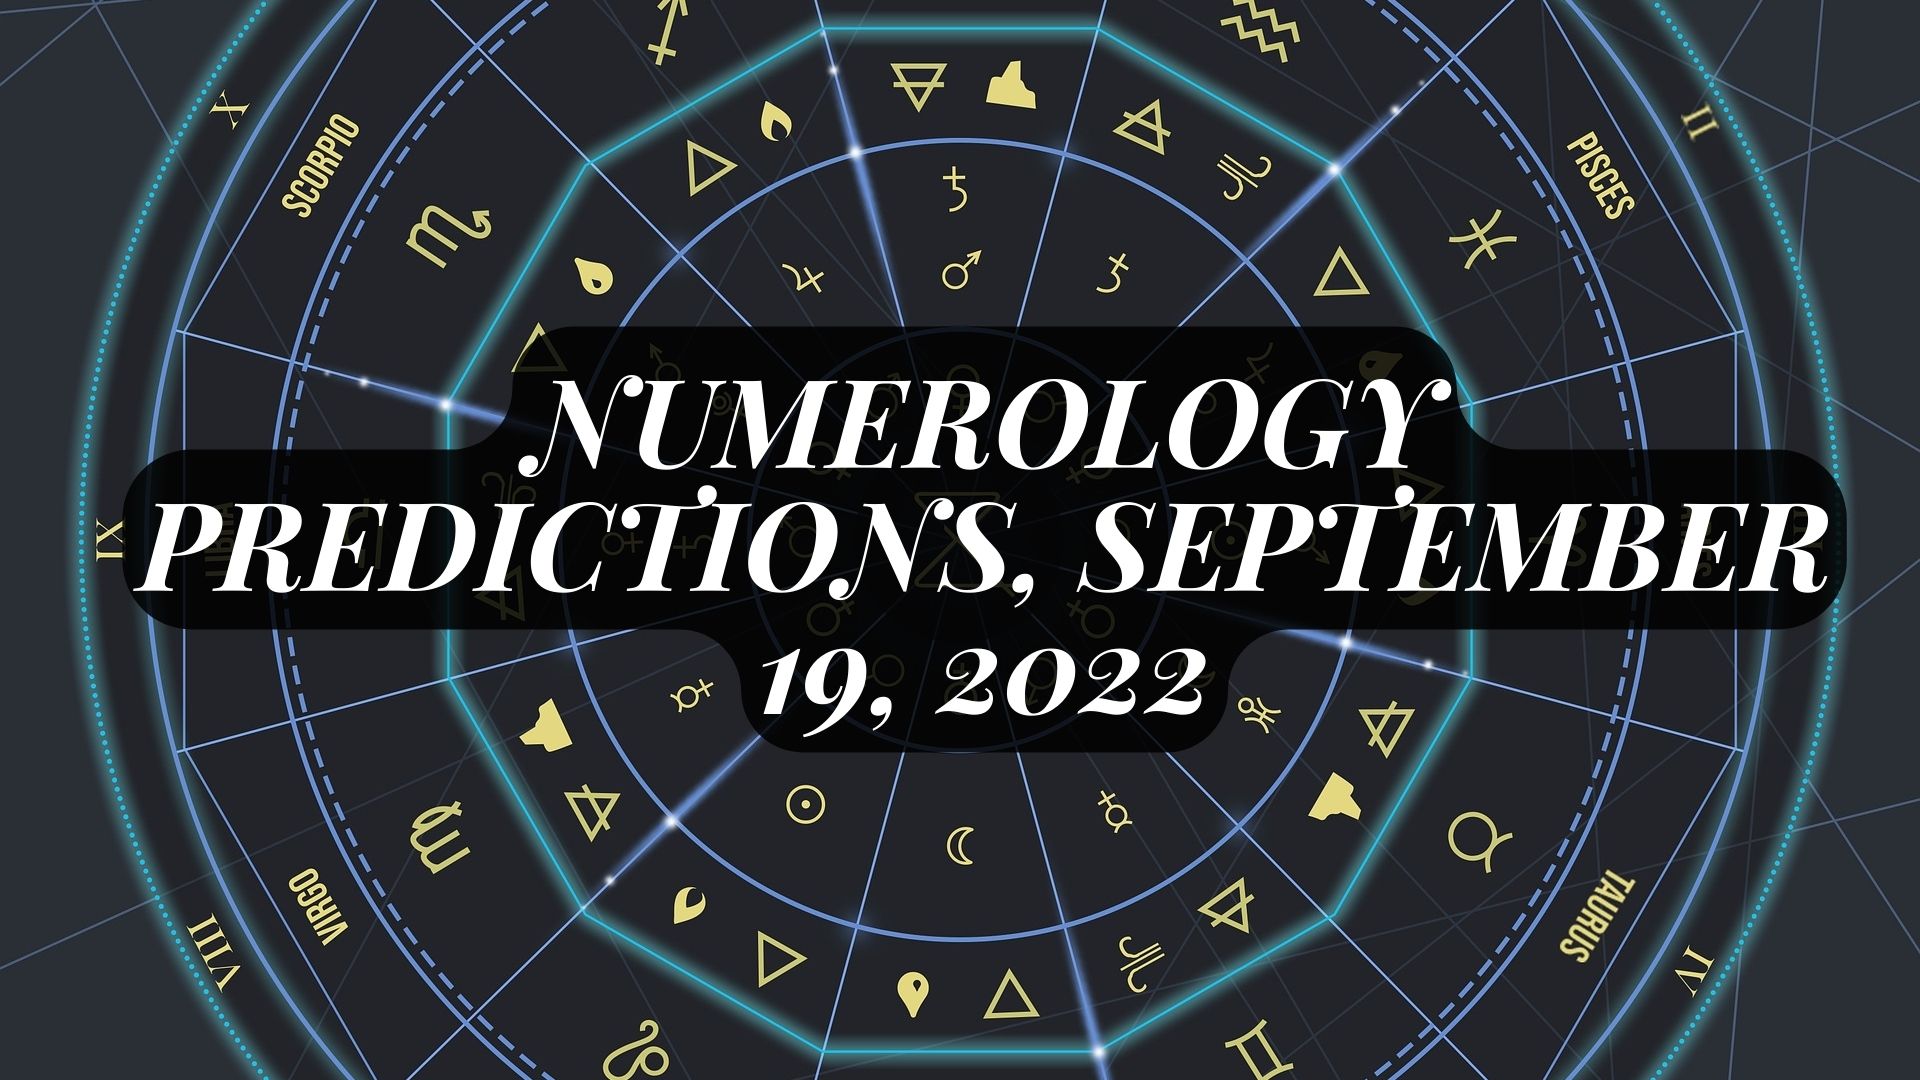 Numerology Predictions, September 19, 2022 - Check Out Your Lucky Numbers And Other Details